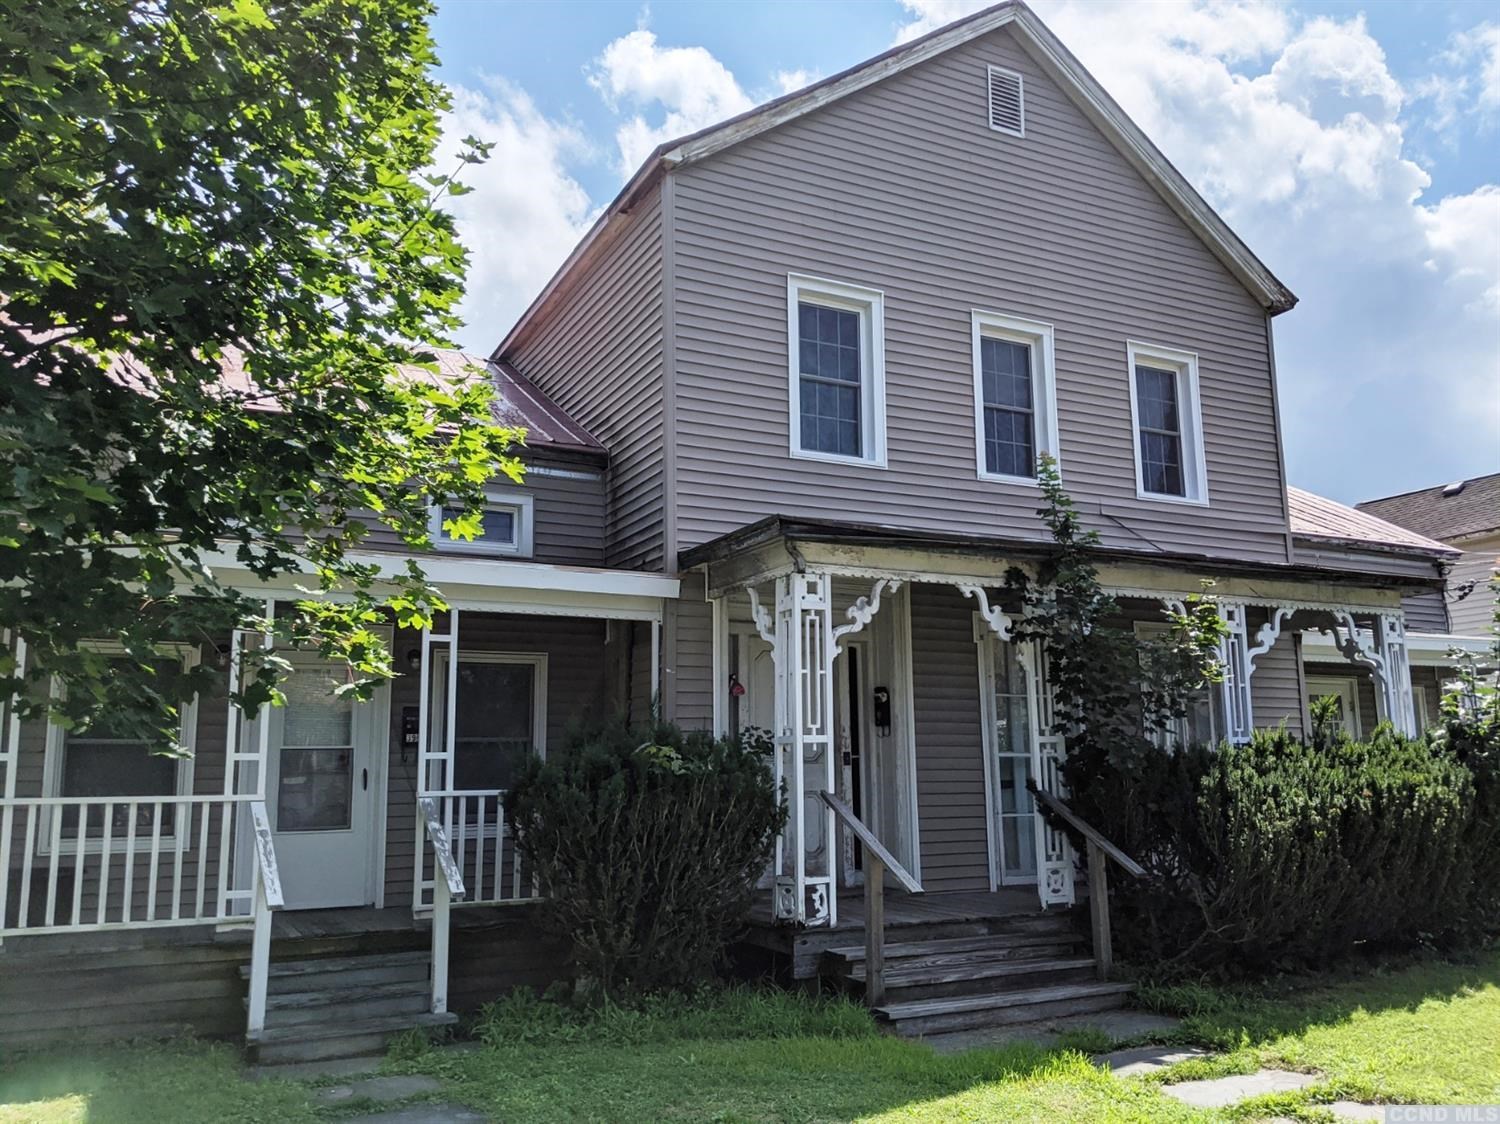 Rental Property at 39 Lafayette Avenue, Coxsackie, New York - Bathrooms: 1 
Rooms: 4  - $850 MO.